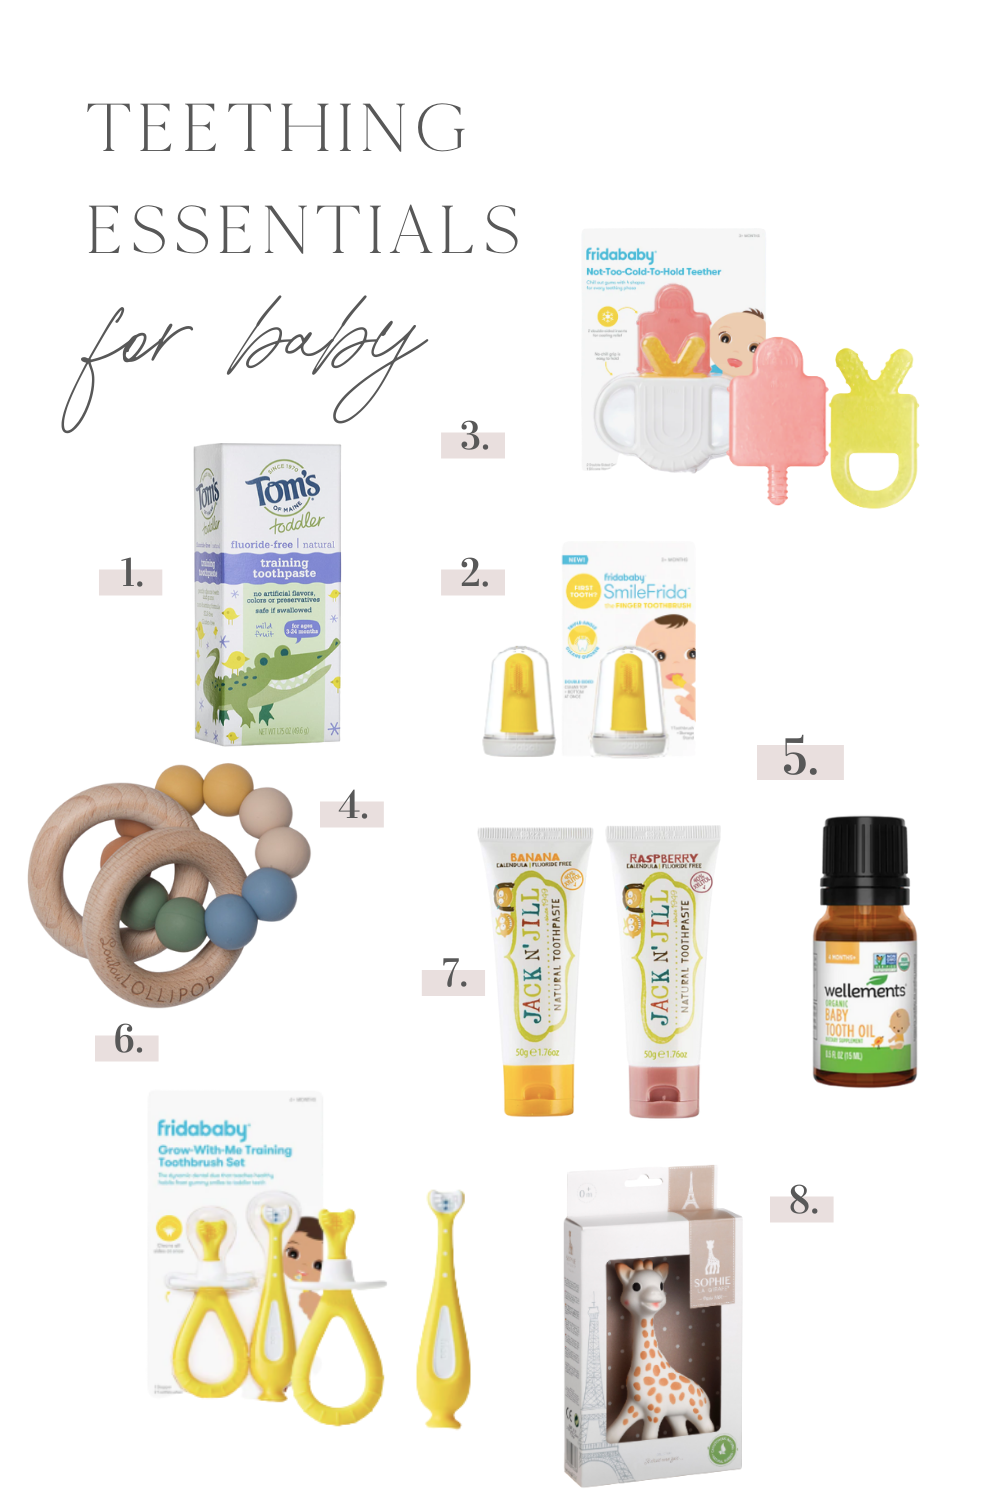 teething essentials and products